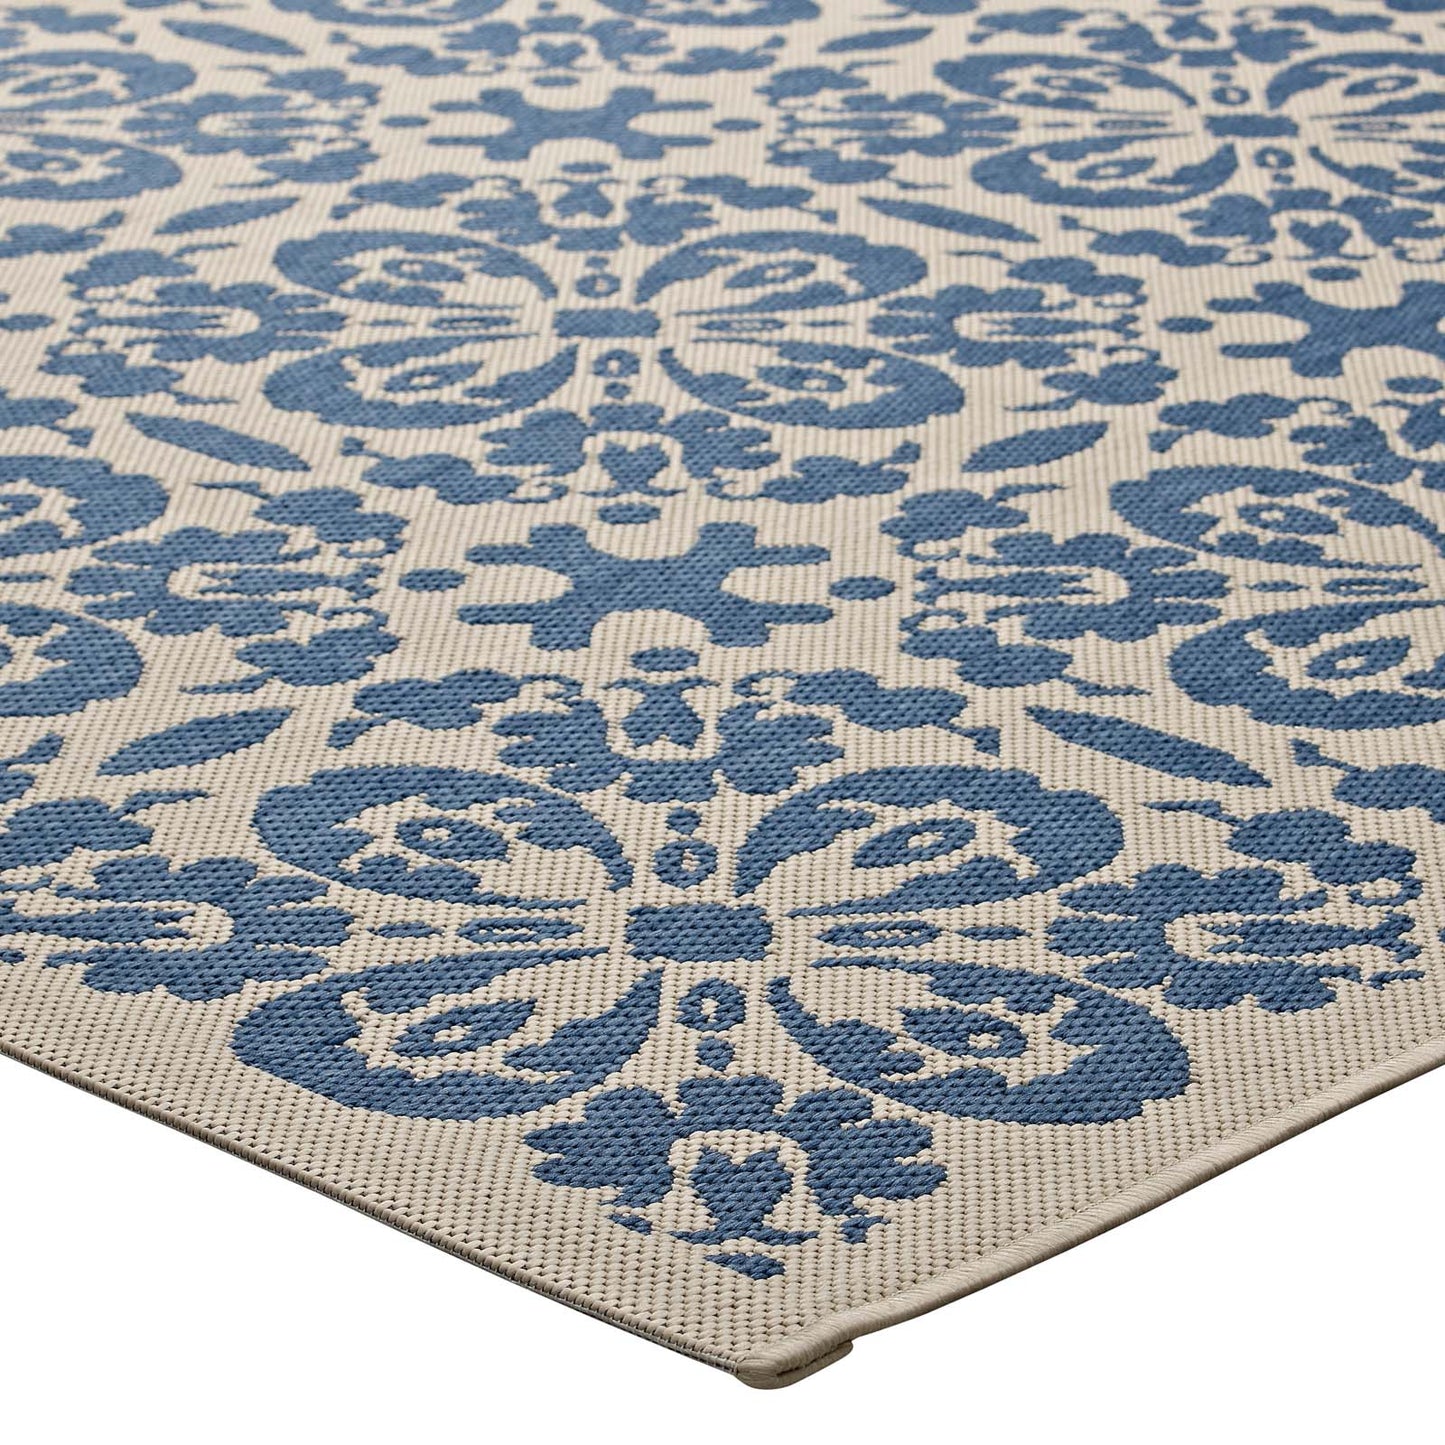 Ariana Vintage Floral Trellis 4x6 Indoor and Outdoor Area Rug Blue and Beige R-1142C-46